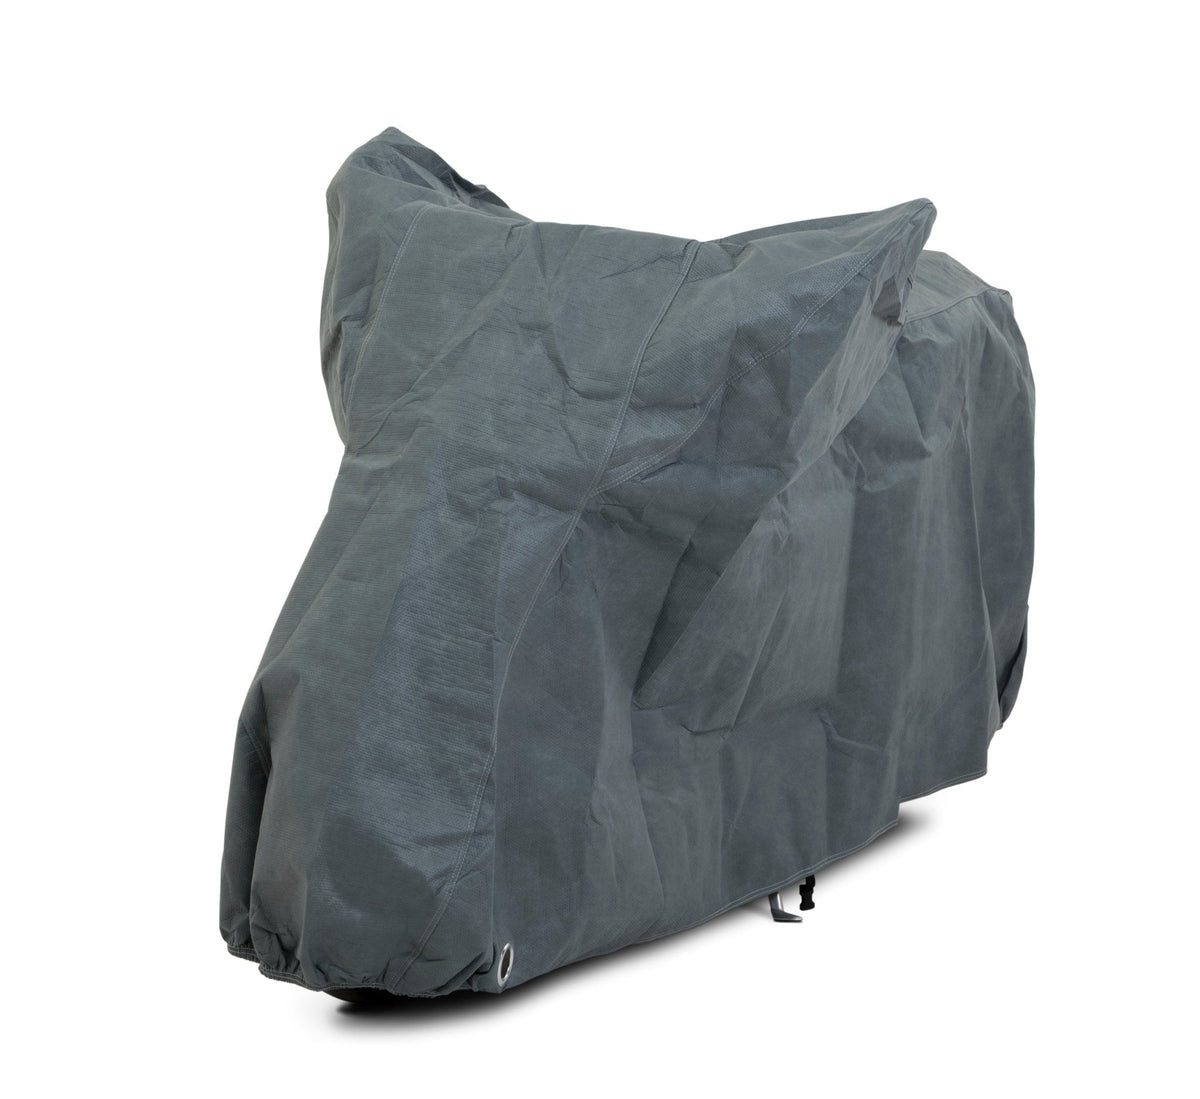 Stormforce best outdoor motorcycle covers for PEUGEOT - Storm Motorcycle Covers